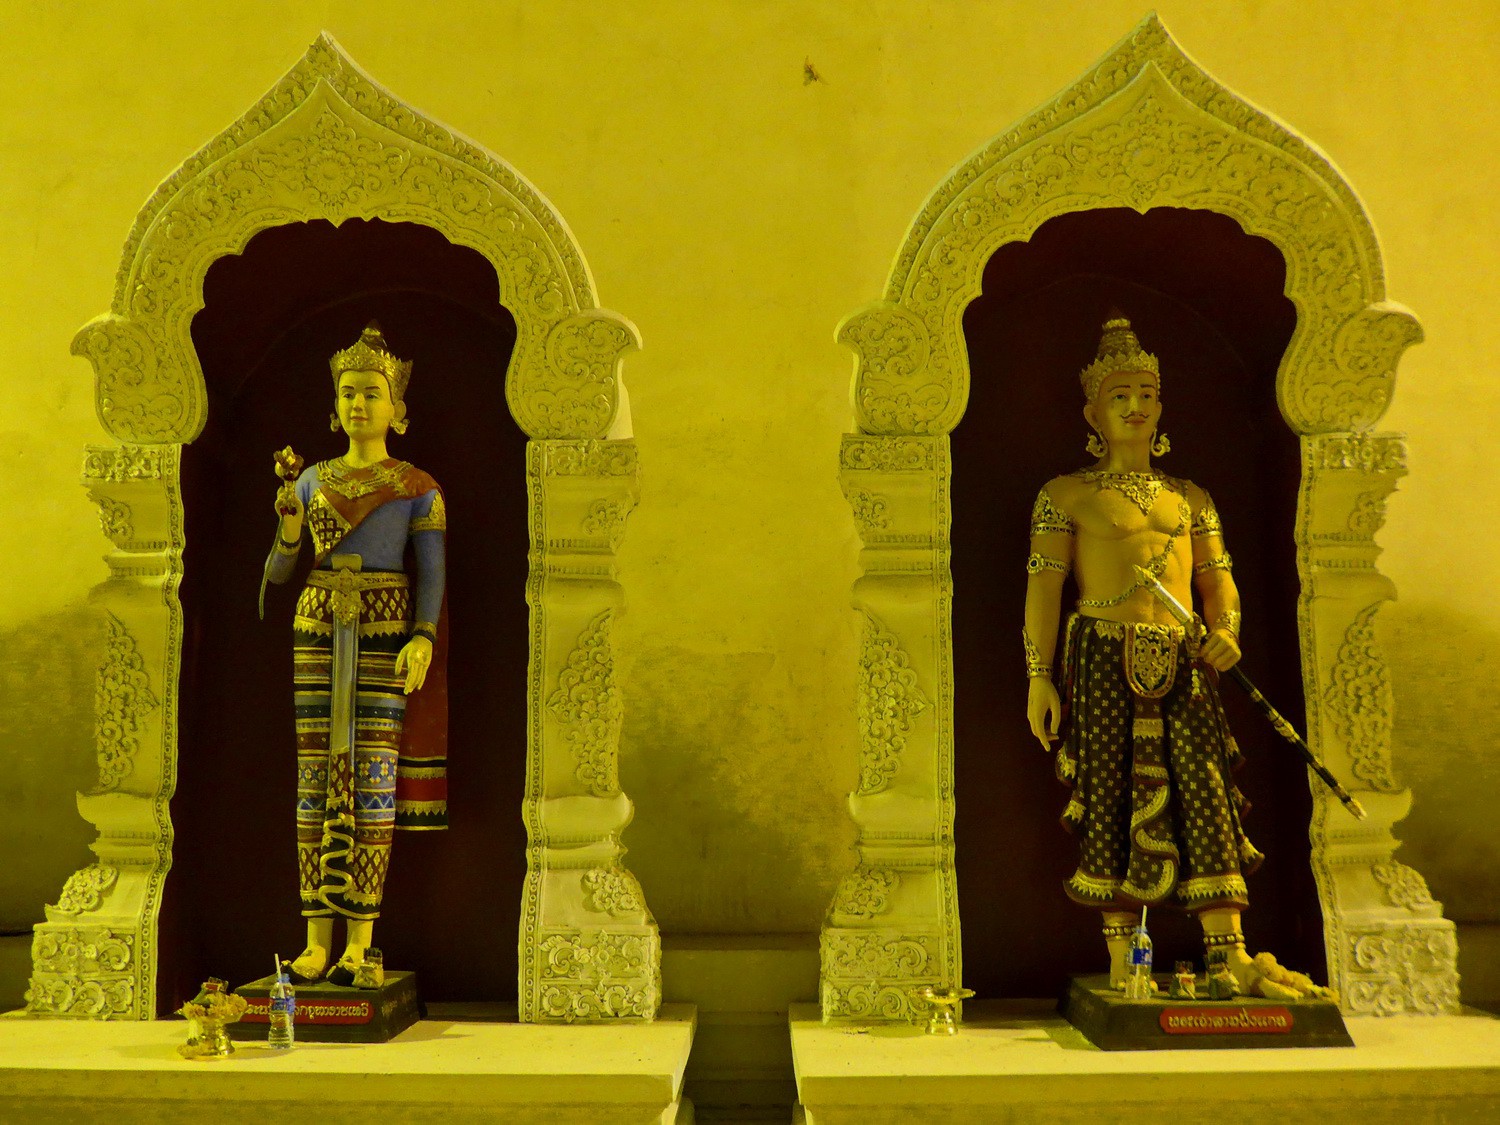 Two figurines